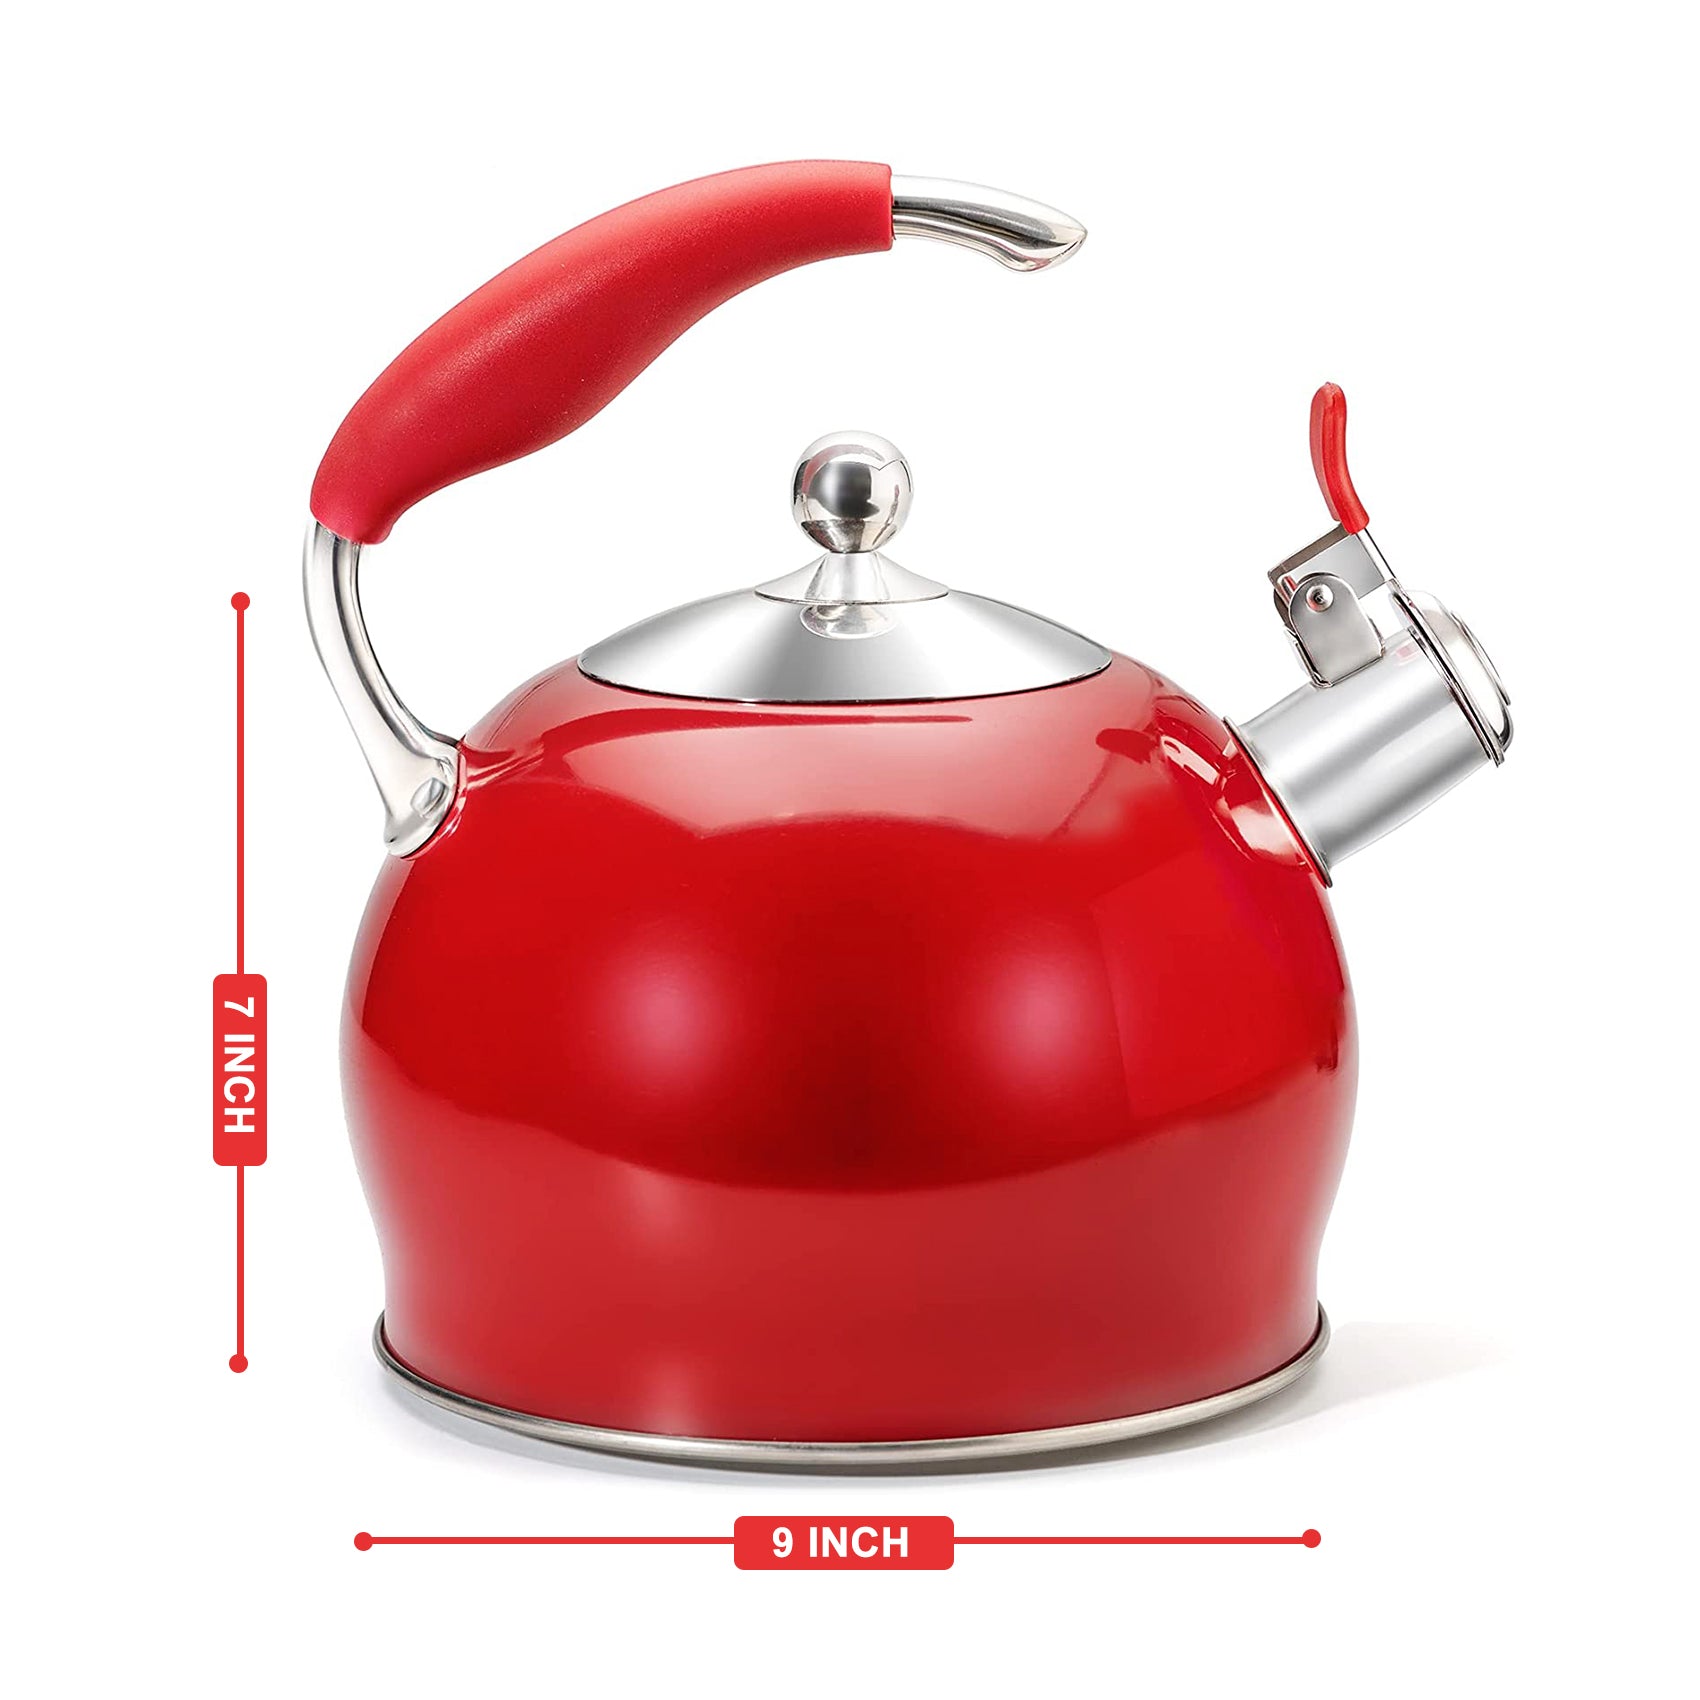 Vintage Teapot Old Metal Teapot Cute Whistling Tea Kettle Chromed Metal Tea  Kettle Vintage Kitchen Décor Chrome and Red Teapot 